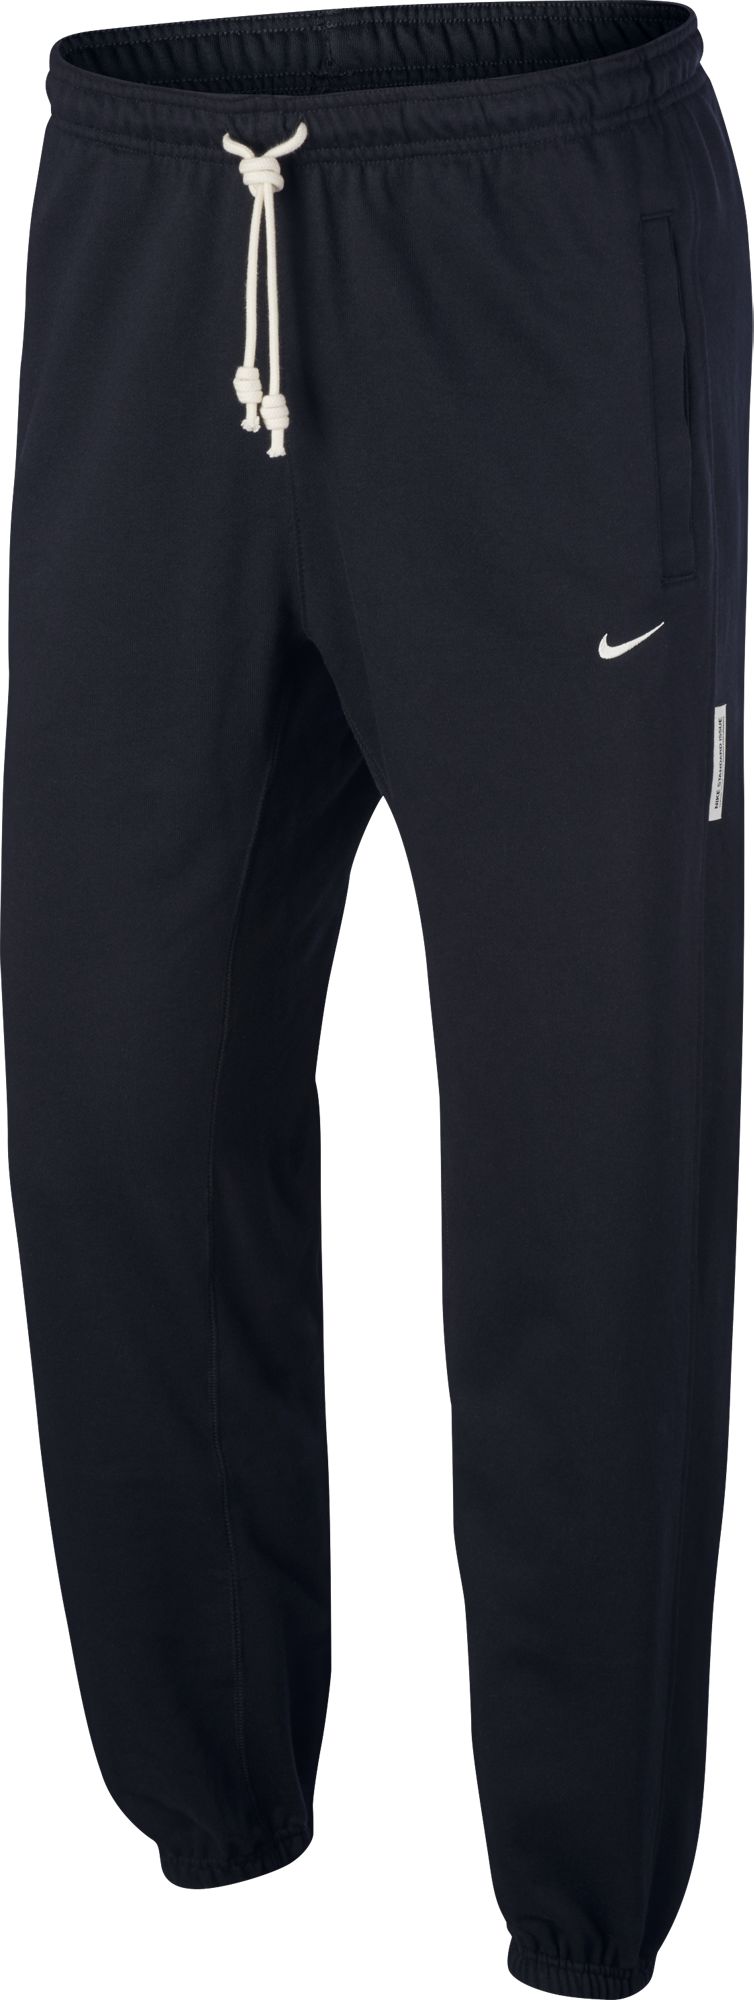 NIKE, M NK DF STD ISSUE PANT